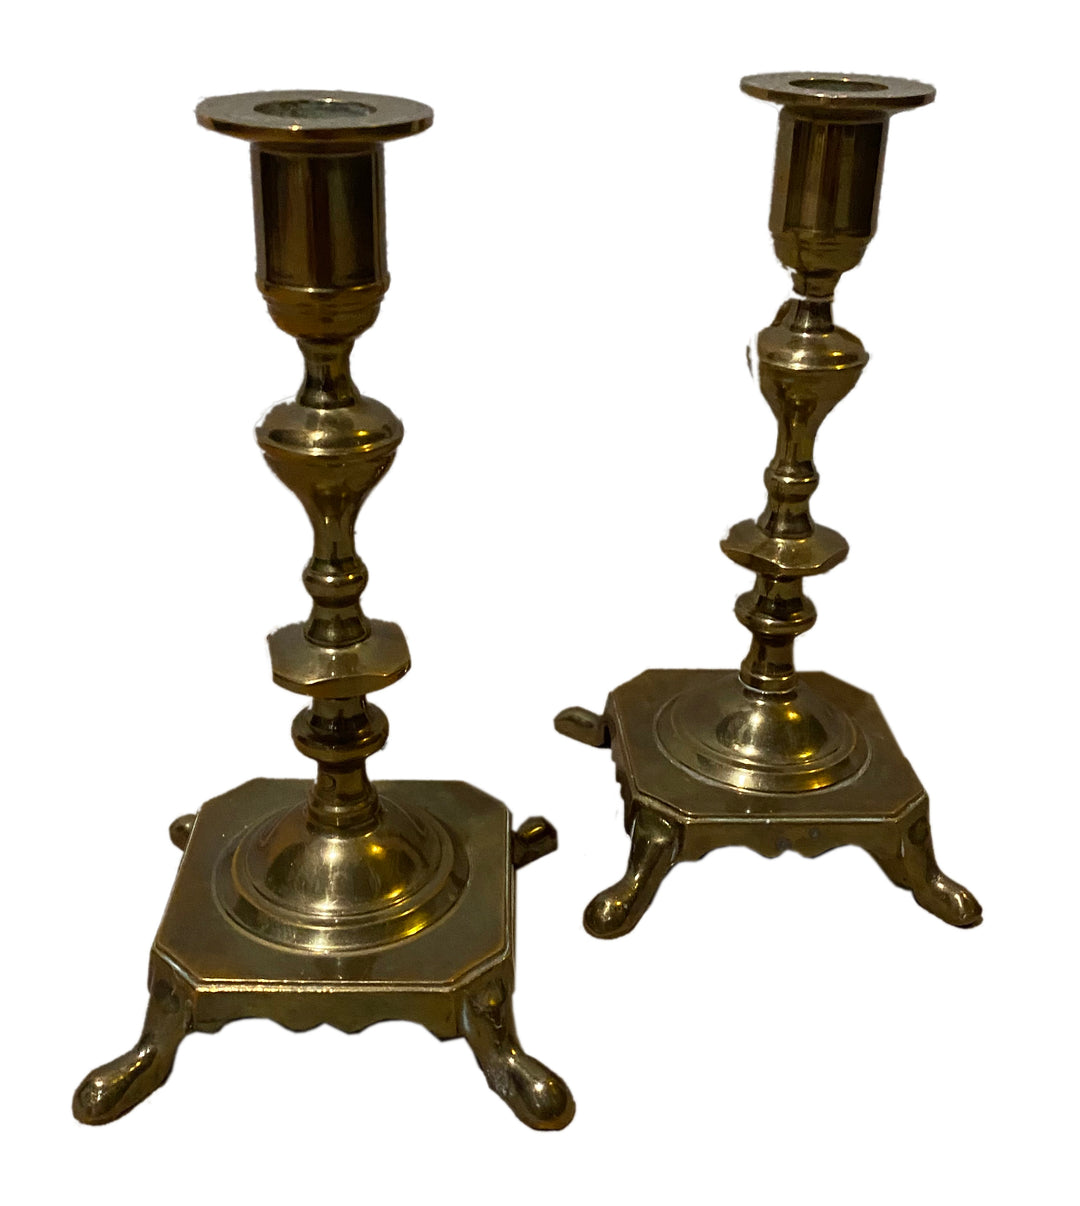 Elegant Pair of Footed Brass Candlesticks